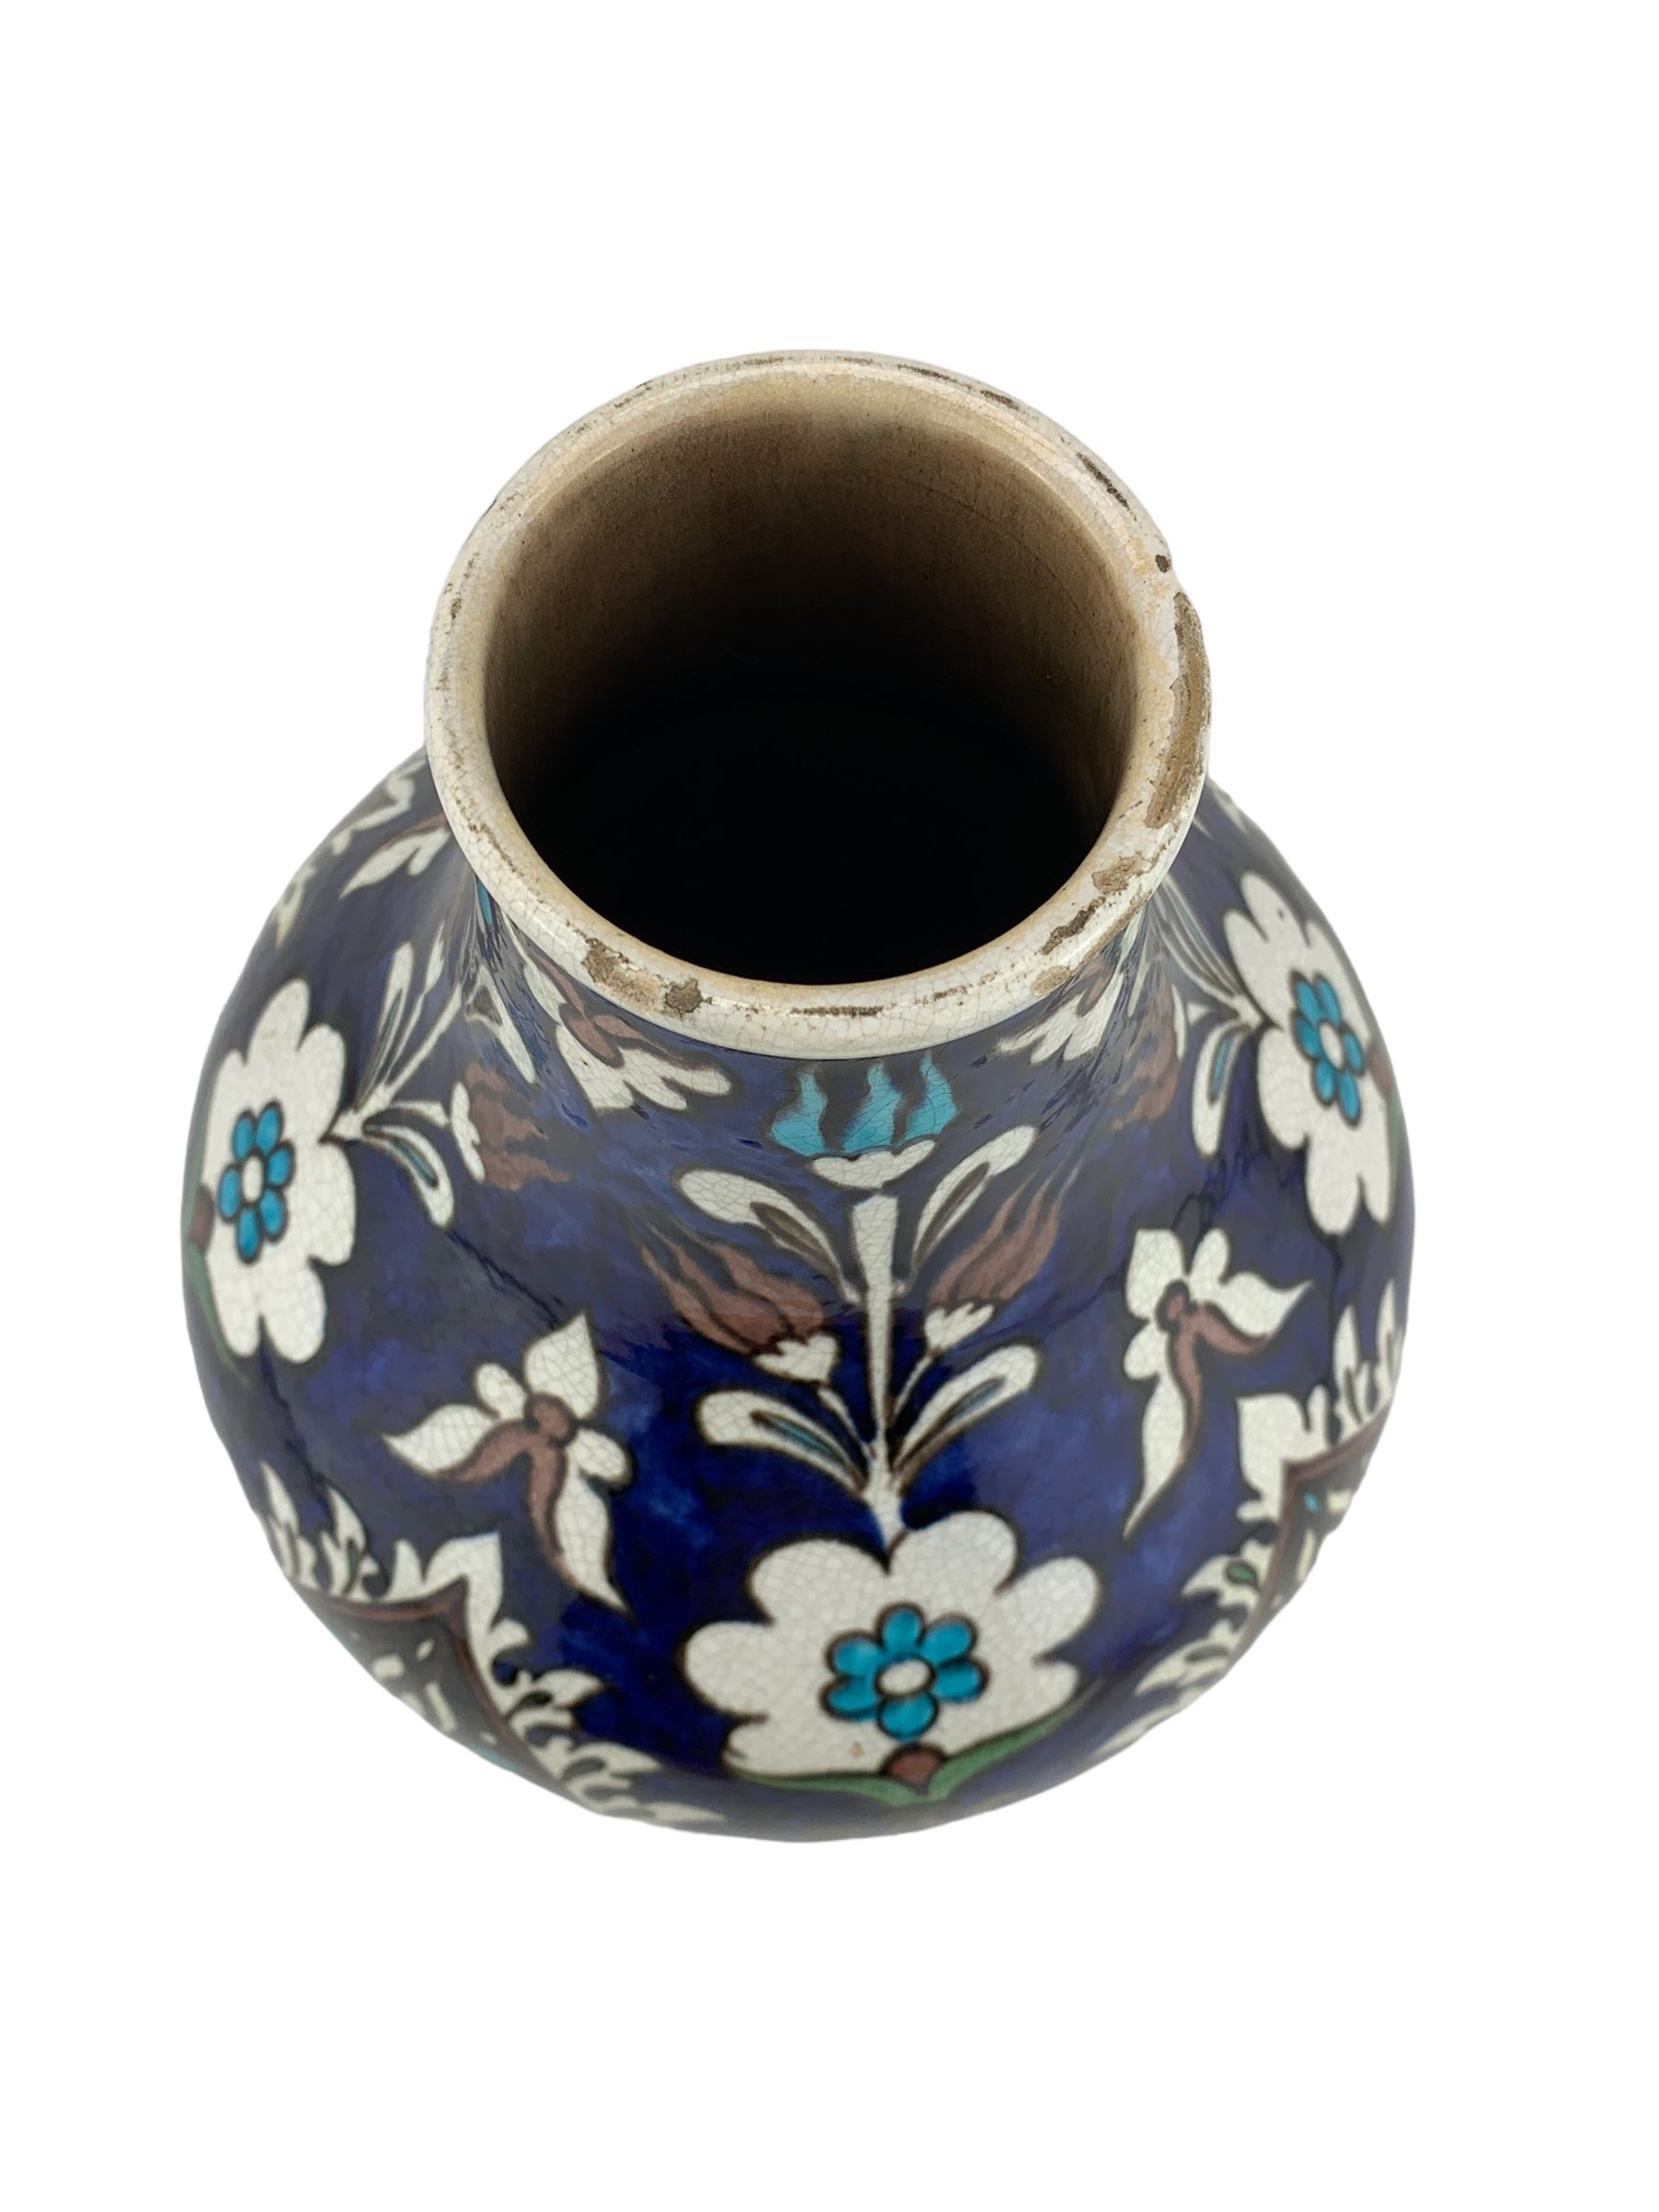 Burmantofts Faience Anglo-Persian bottle vase - Image 6 of 7